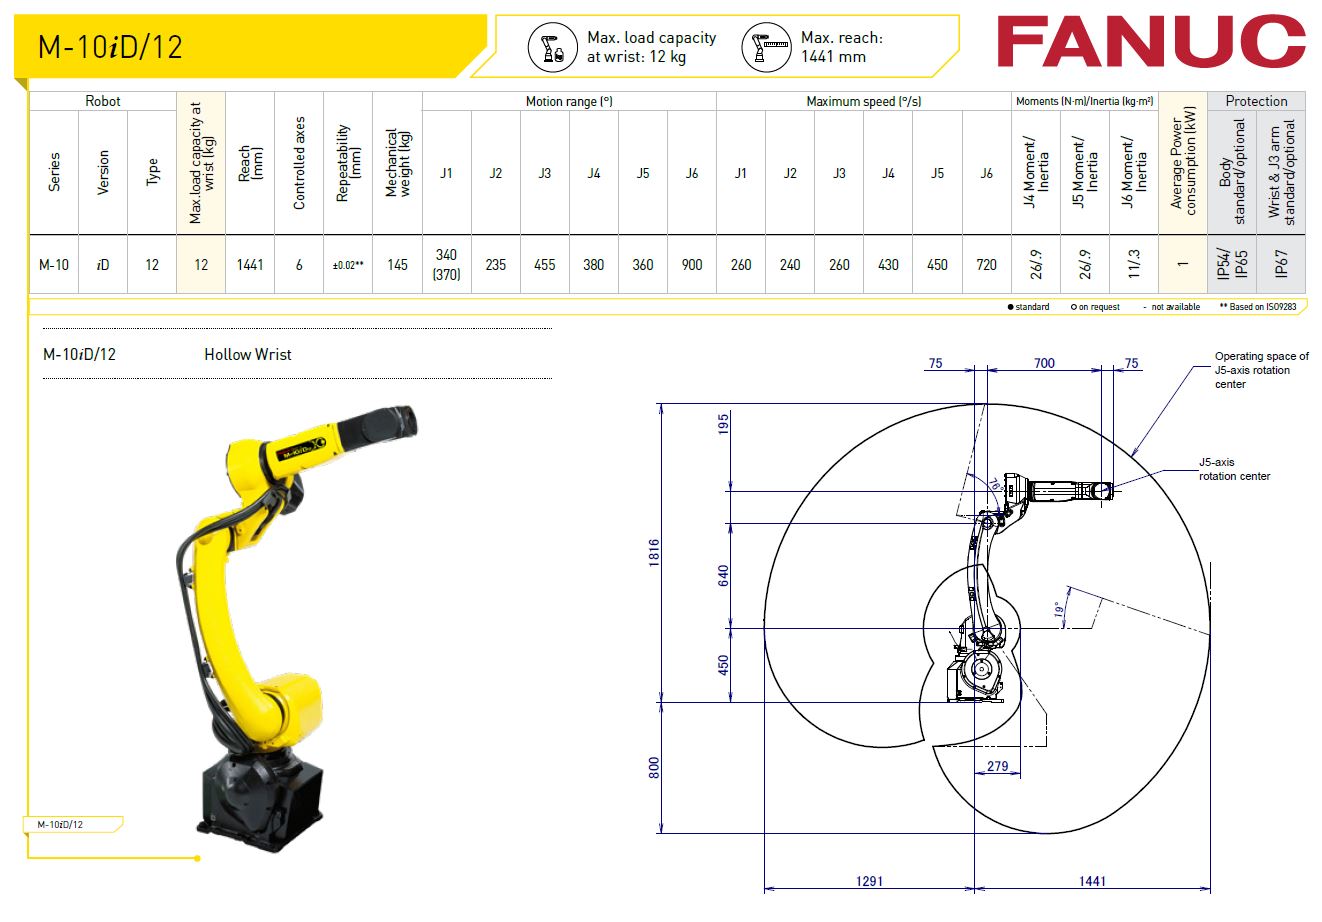 M-10iD-12 Fanuc Robot Specifications - RobotWorld